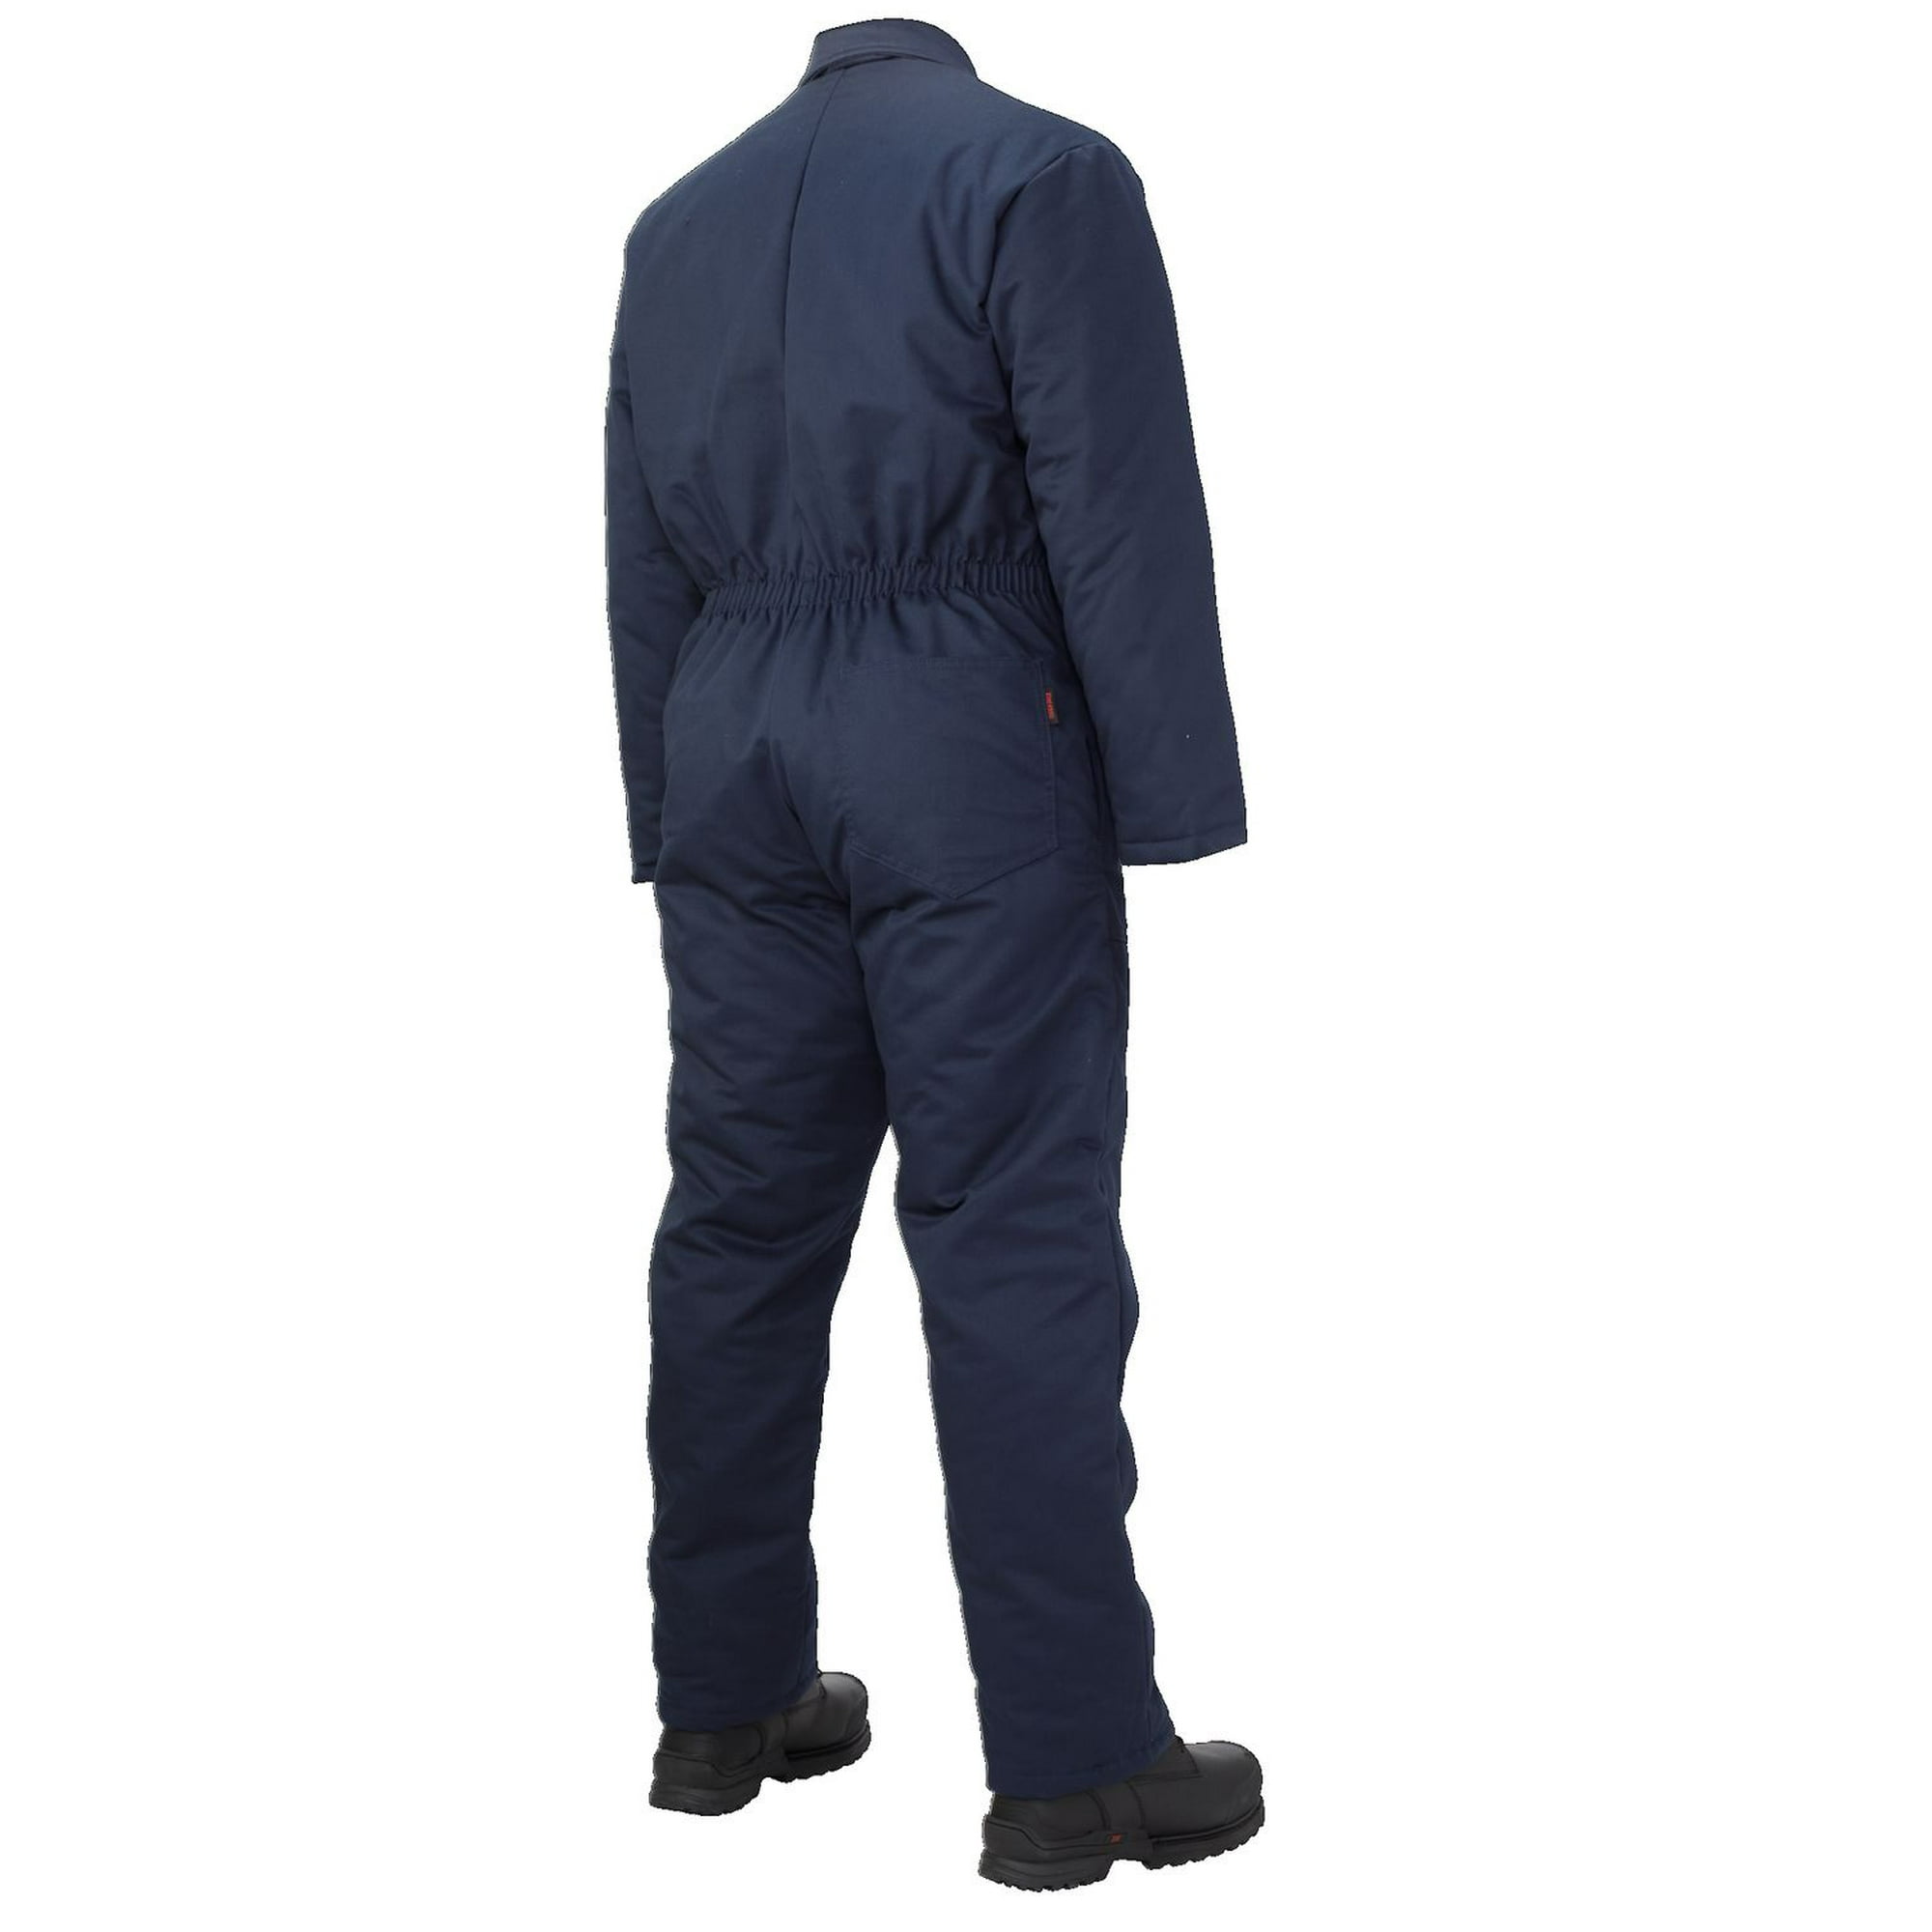 TOUGH DUCK Men's Insulated Coverall